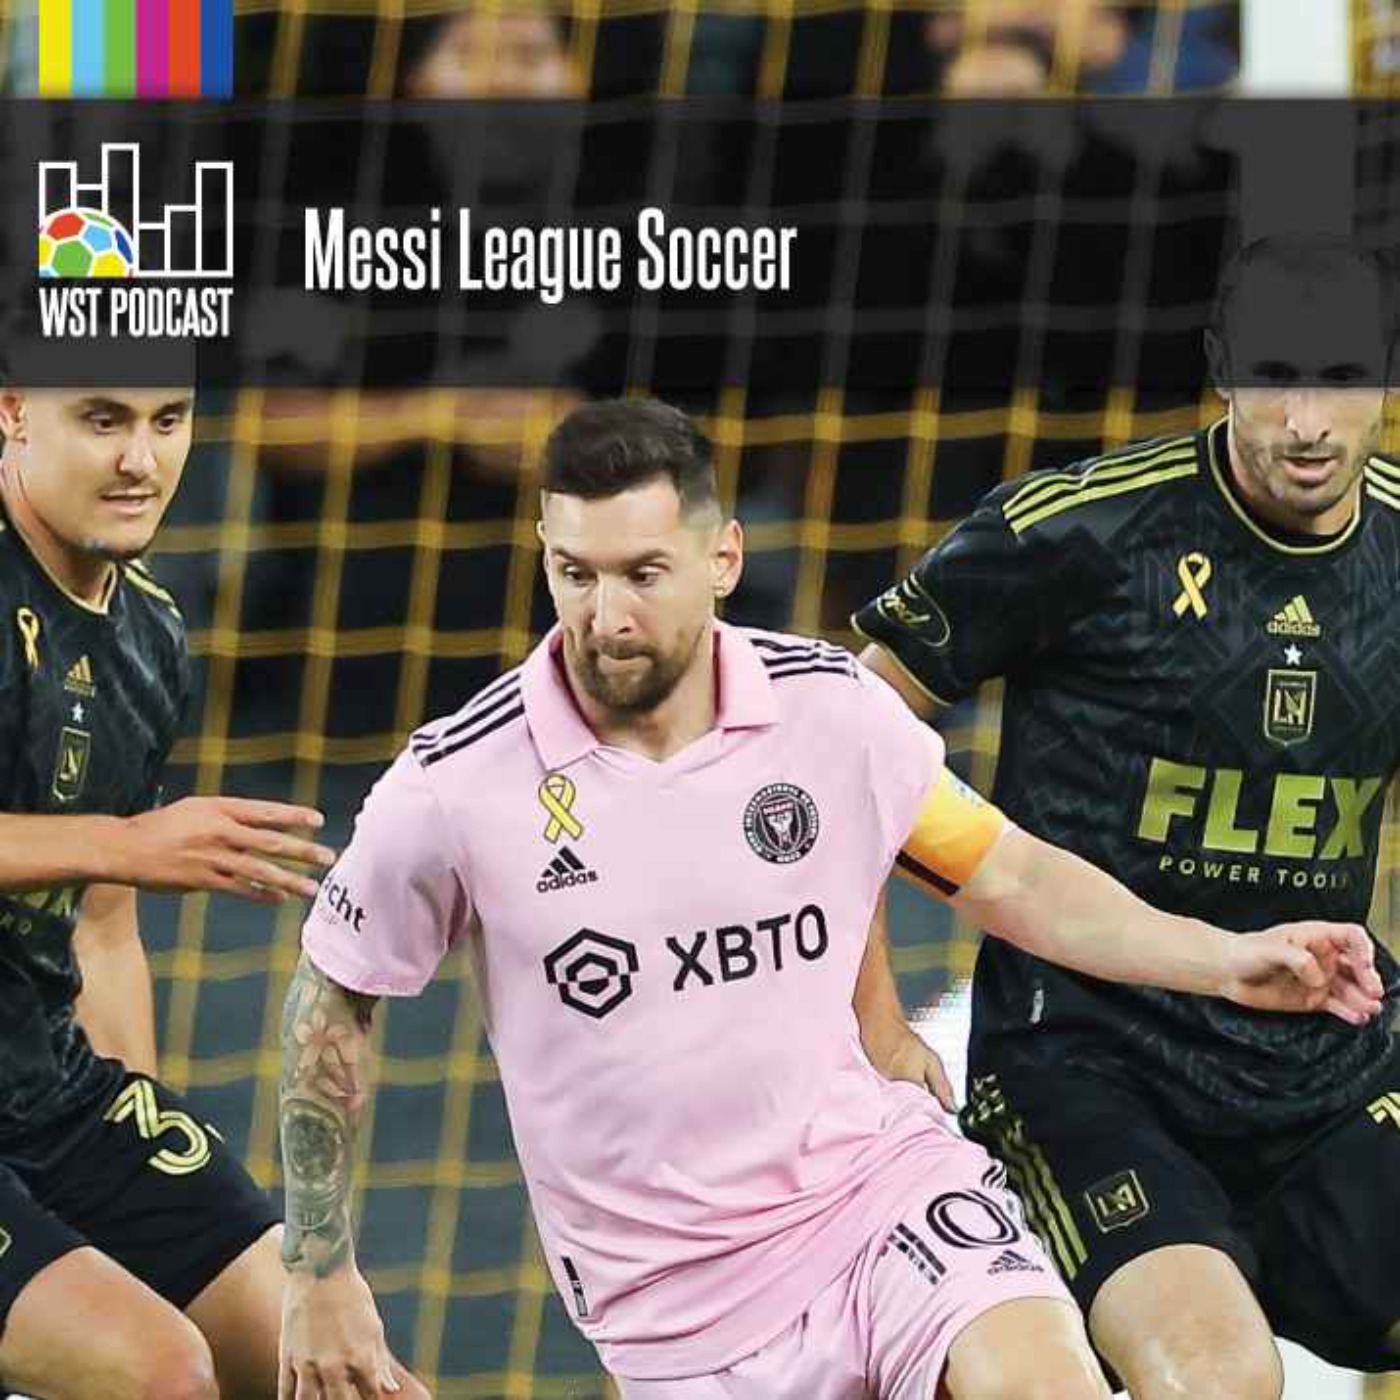 Messi League Soccer: Pros and cons of his success in USA